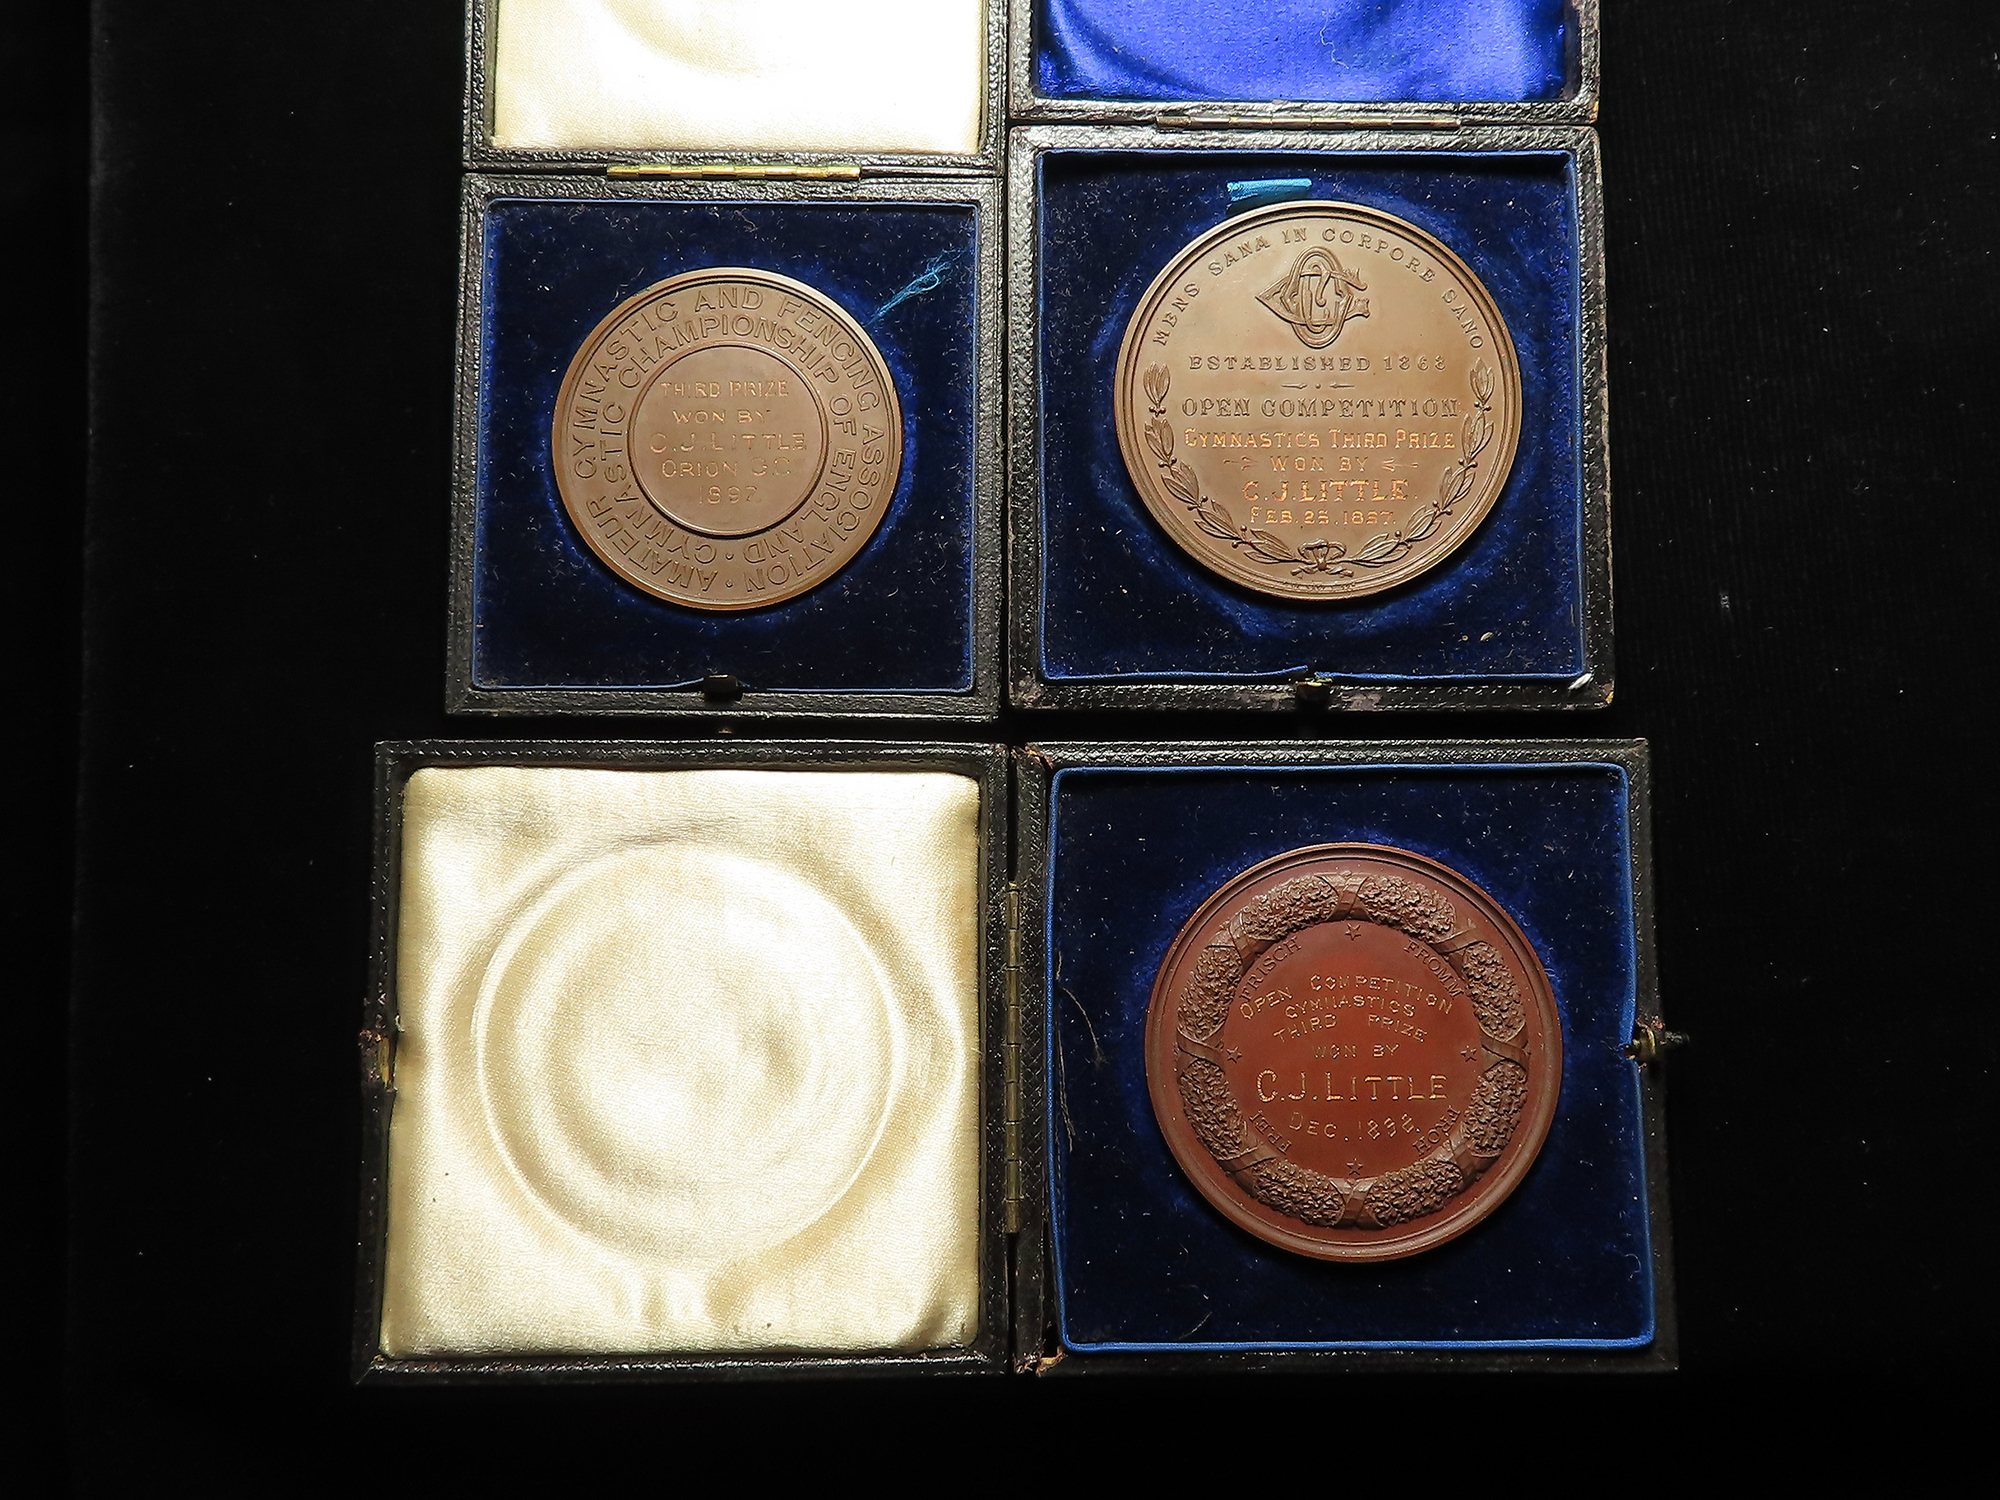 British Sports Medals, bronze d.44-51mm (3): Late Victorian gymnastics medals to C.J. Little, - Image 2 of 2